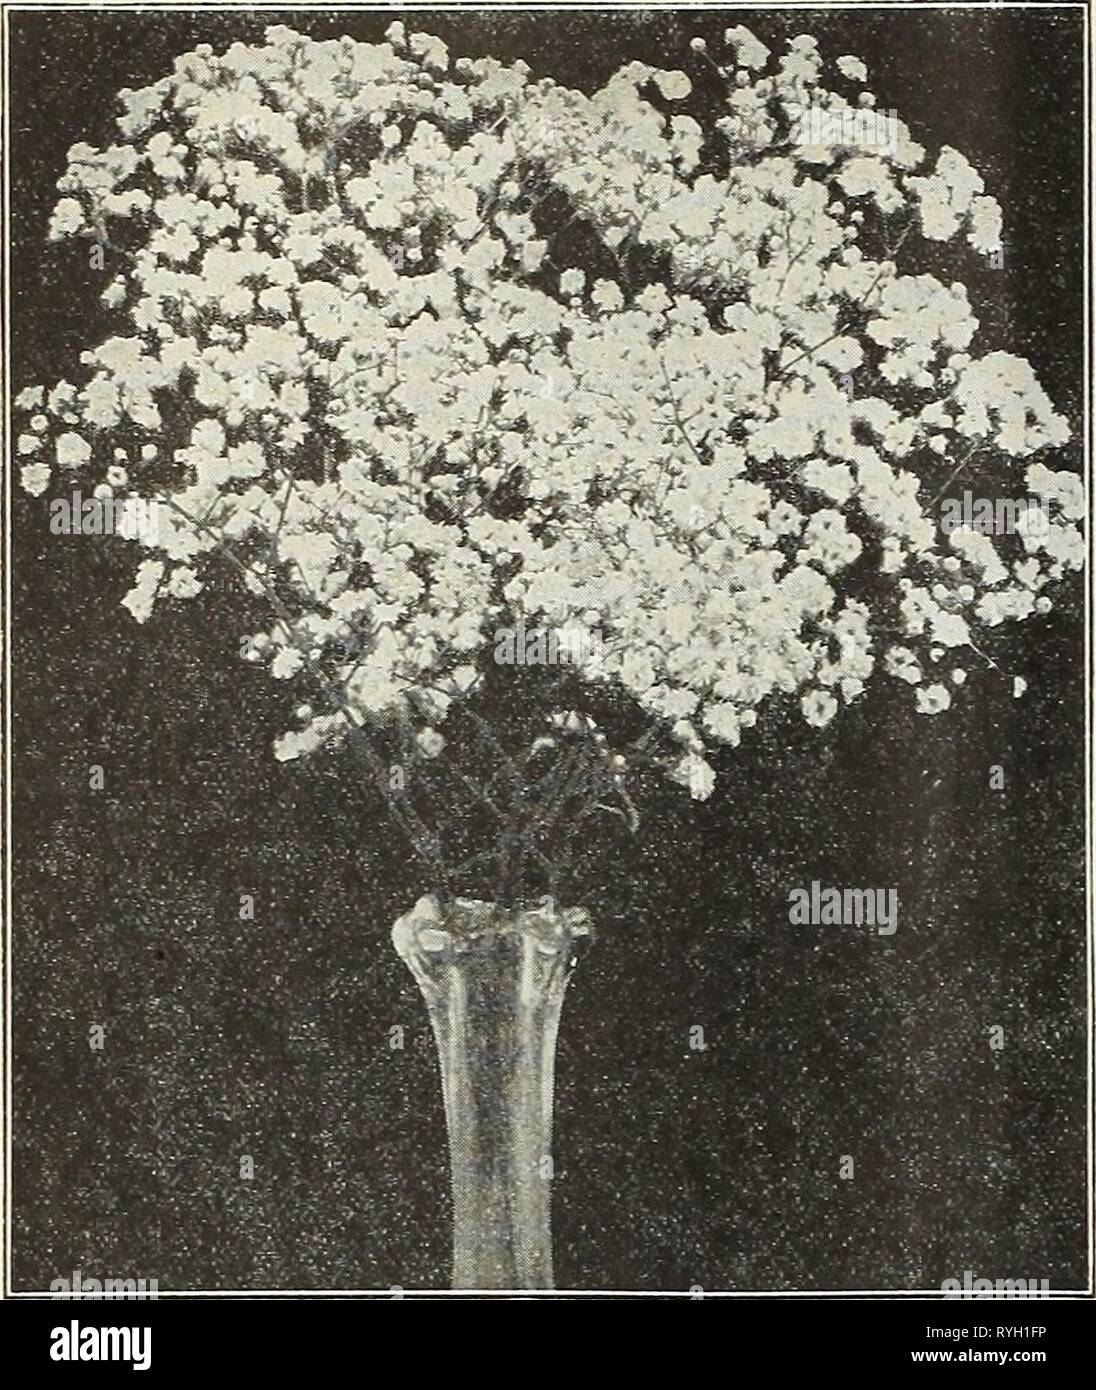 Dreer's wholesale price list for florists : special spring edition  dreerswholesalep1931henr 0 Year: 1931  68 HENRY A. DREER Hardy Plants WHOLESALE LIST    Iris Interregna An Interesting type, the result of crossing I. Ger- inanica with I. pnniila hybrida. They bloom earlier than the Germanica Iris. The flower stems are almost 18 inches high, holding the flowers well above the foliage. Fritjof. Standards lavender, falls satiny blue. Helge. Standards creamy yellow, falls darker, veined yellow. Spectabills. Rich, free-flowering violet-purple. 15 cts. each; $1.50 per doz.; $10.00 per 100. Iris Pa Stock Photo